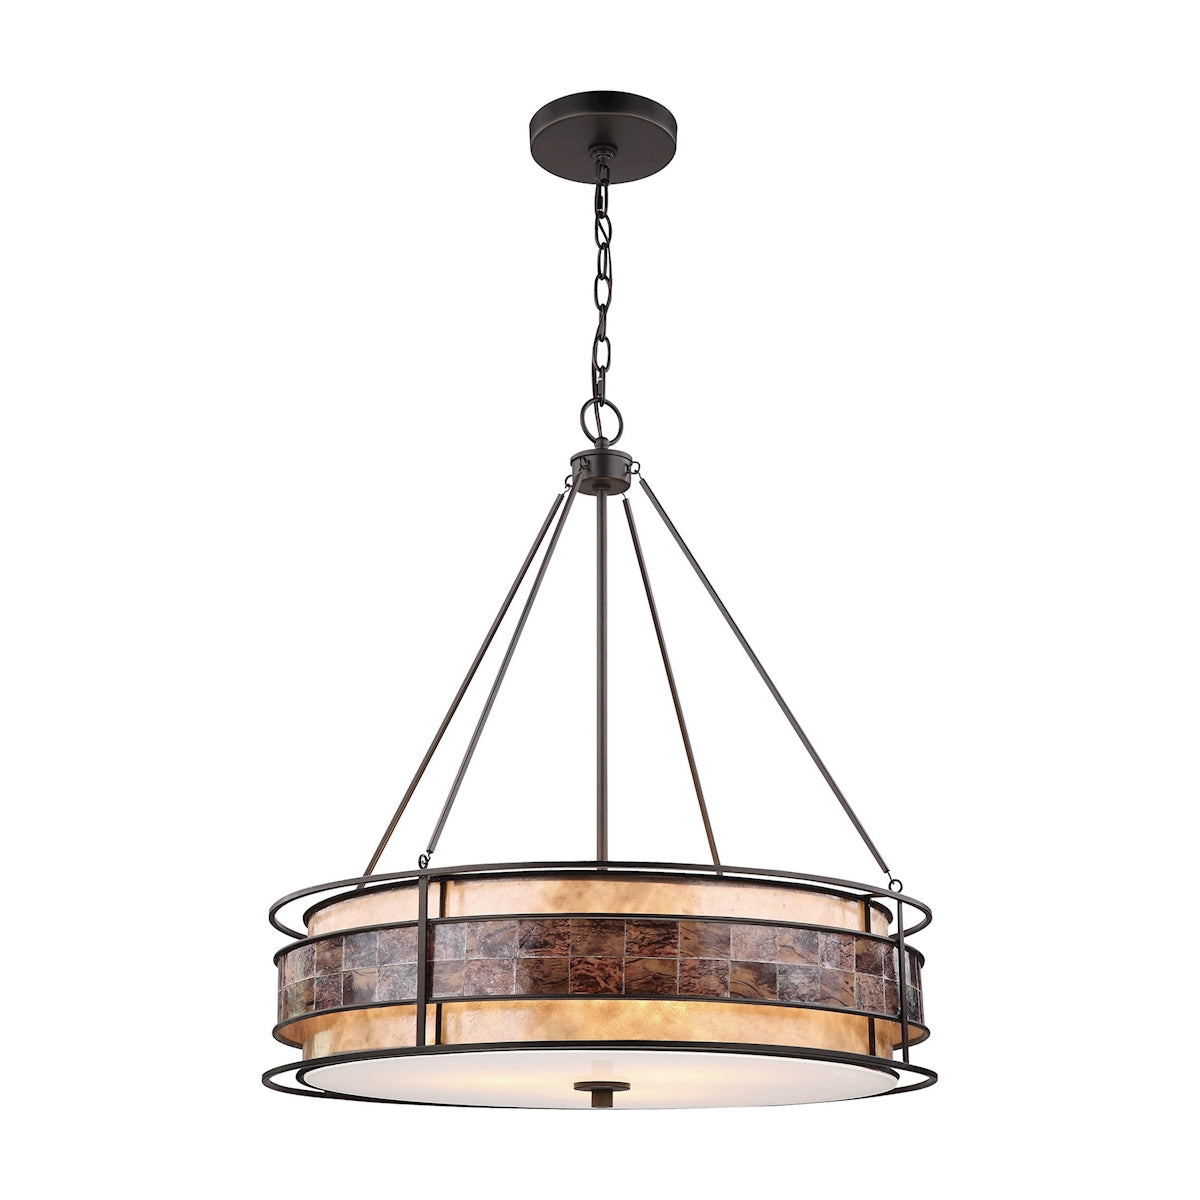 ELK Lighting 70264/3 Tremont 3-Light Chandelier in Tiffany Bronze with Brown Mosaic and Tan Mica Shade